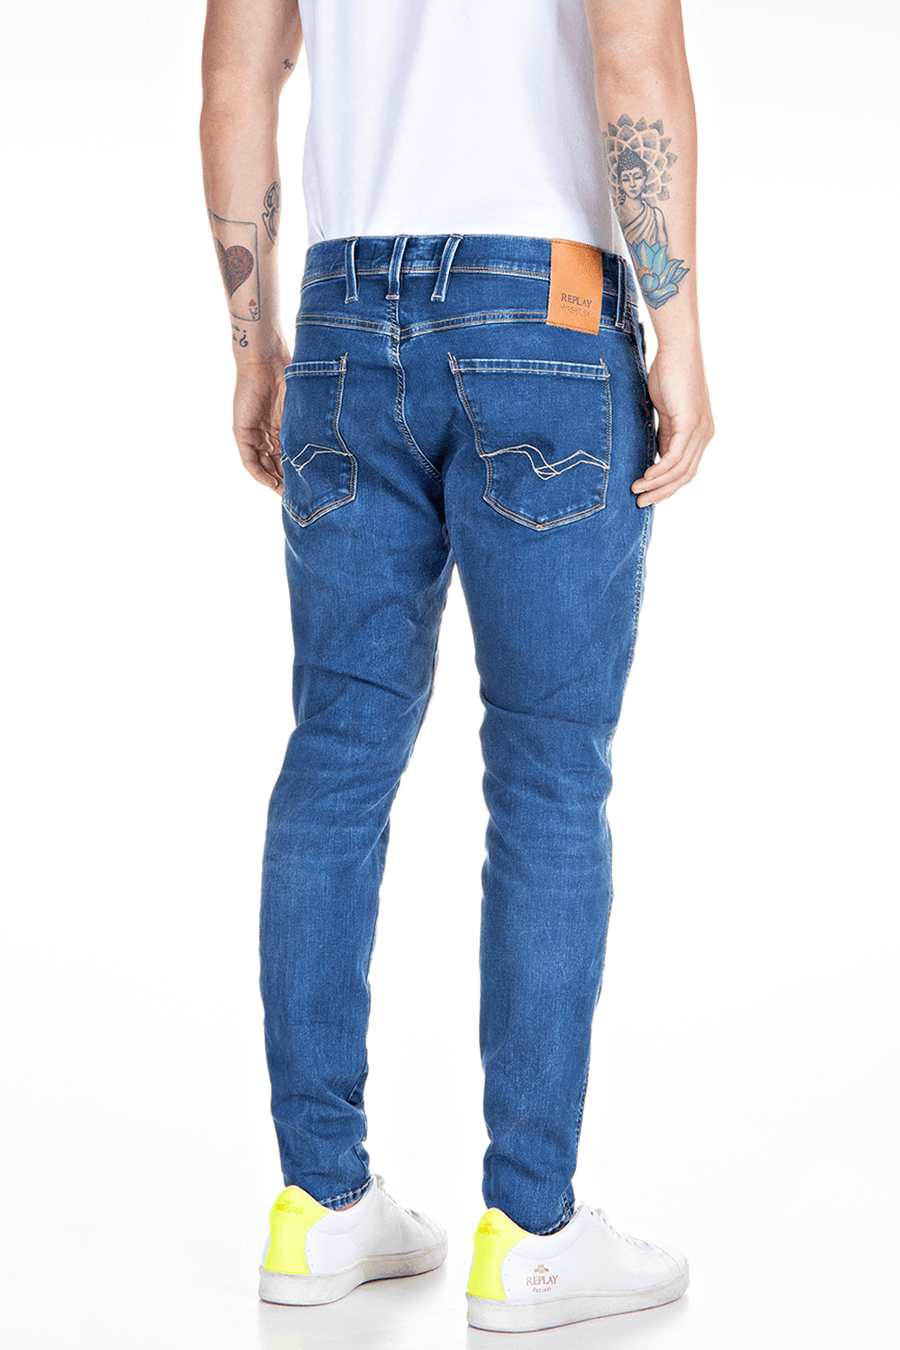 Buy the Replay Hyperflex Anbass Jean in Blue at Intro. Spend £50 for free UK delivery. Official stockists. We ship worldwide.